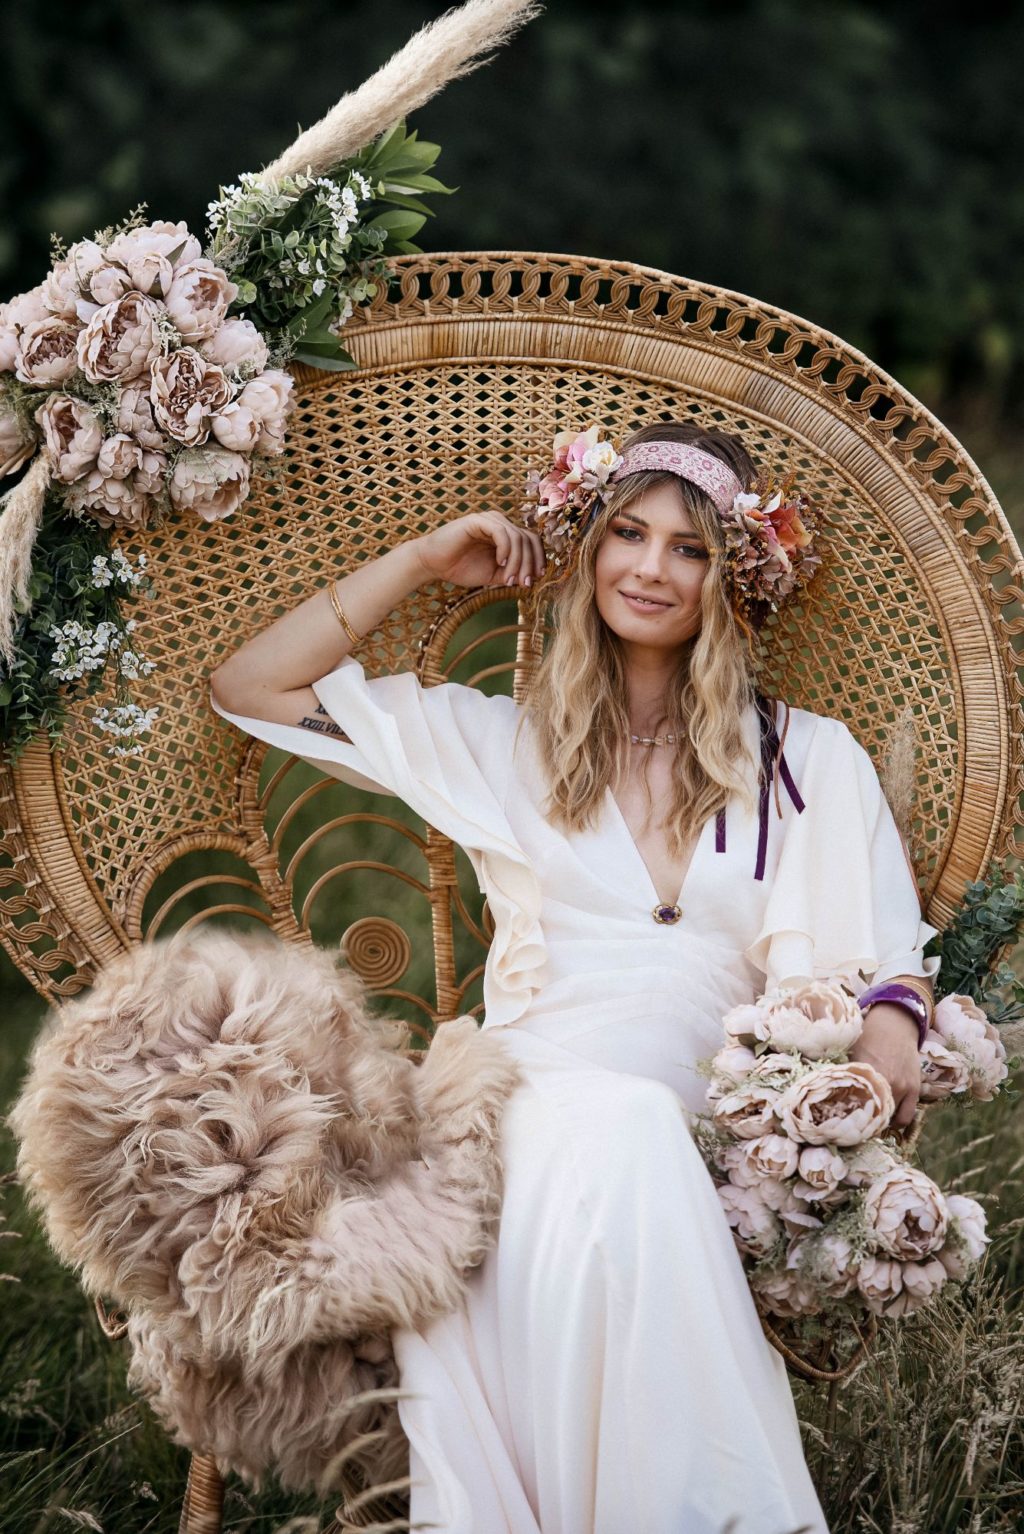 From Sunrise To Sunset; Five Alternative Bridal Looks For Your Wedding Day